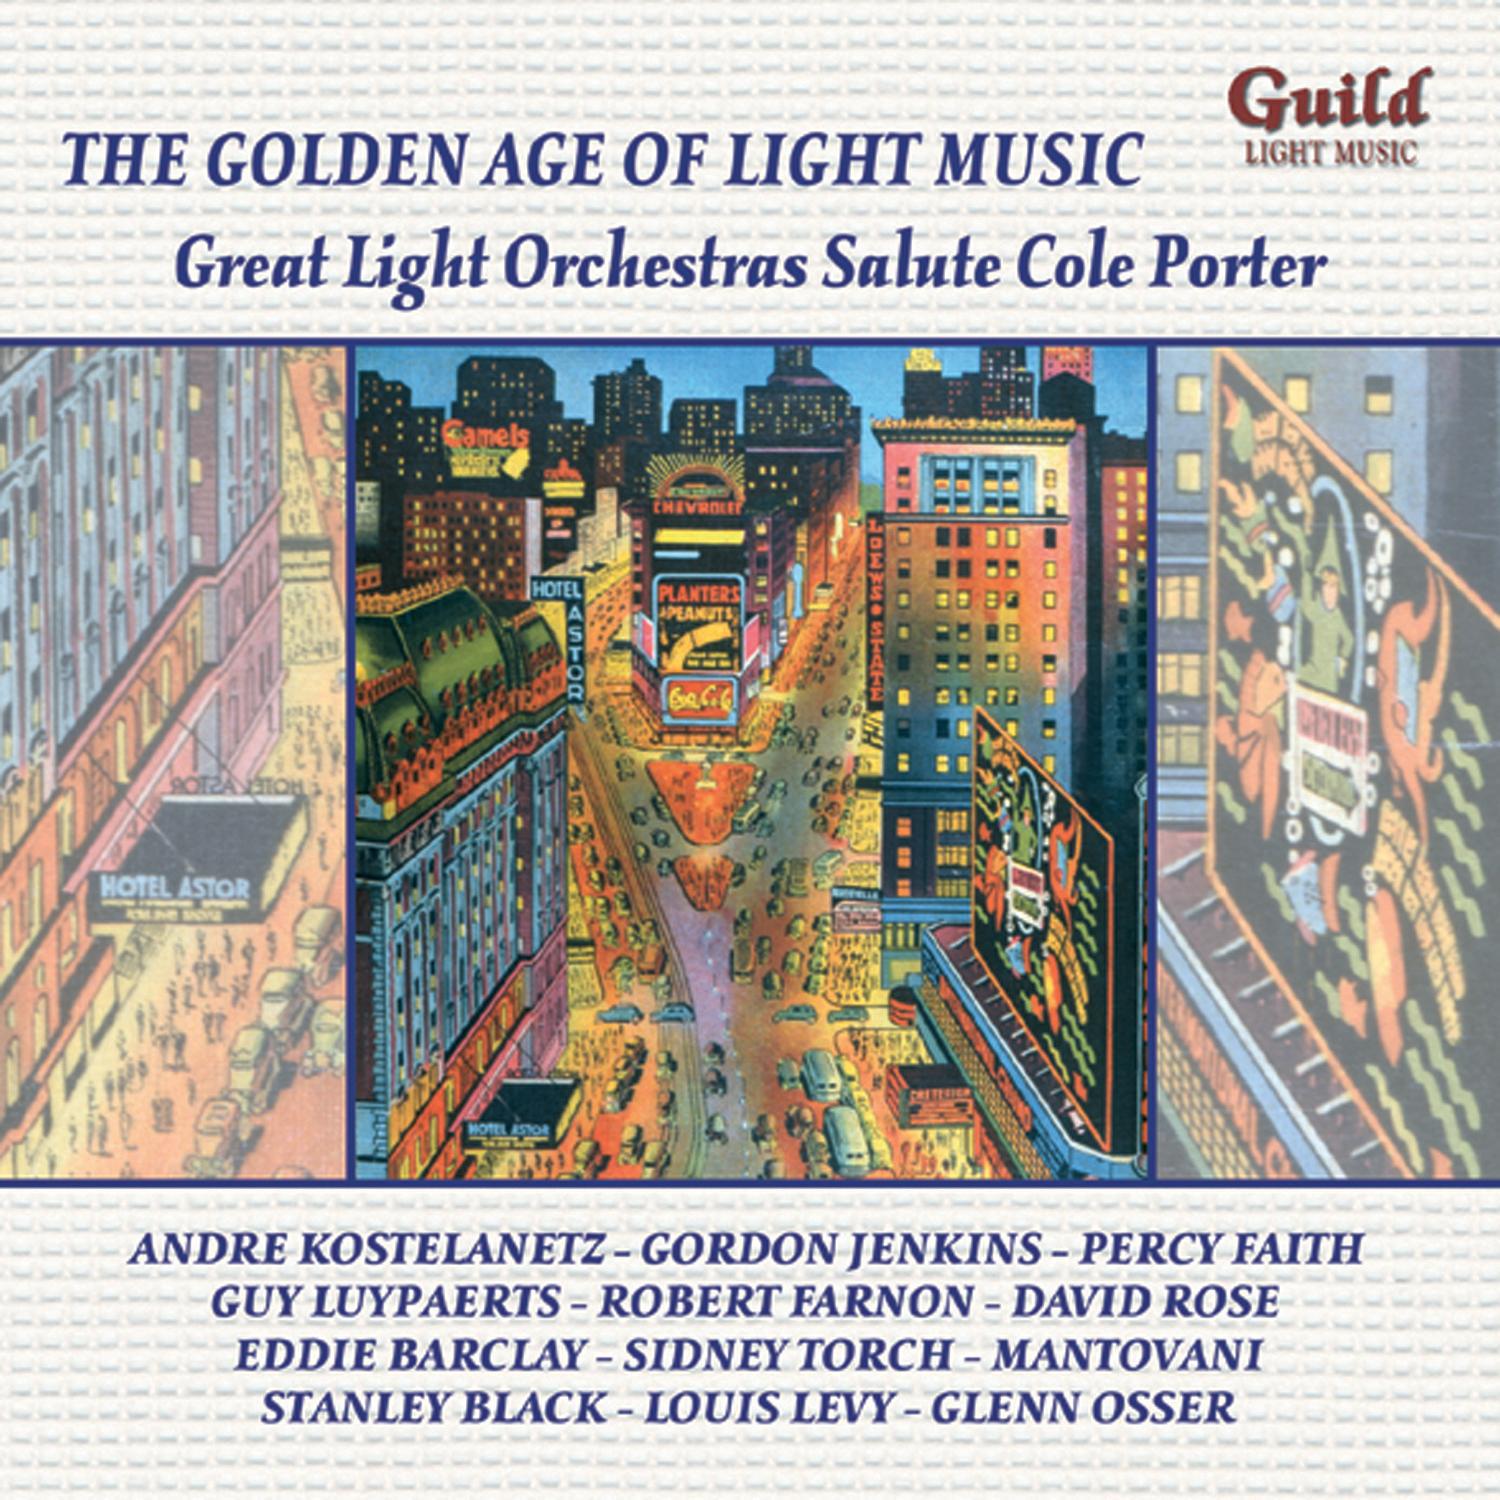 The Golden Age of Light Music: The Great Light Orchestras Salute Cole Porter